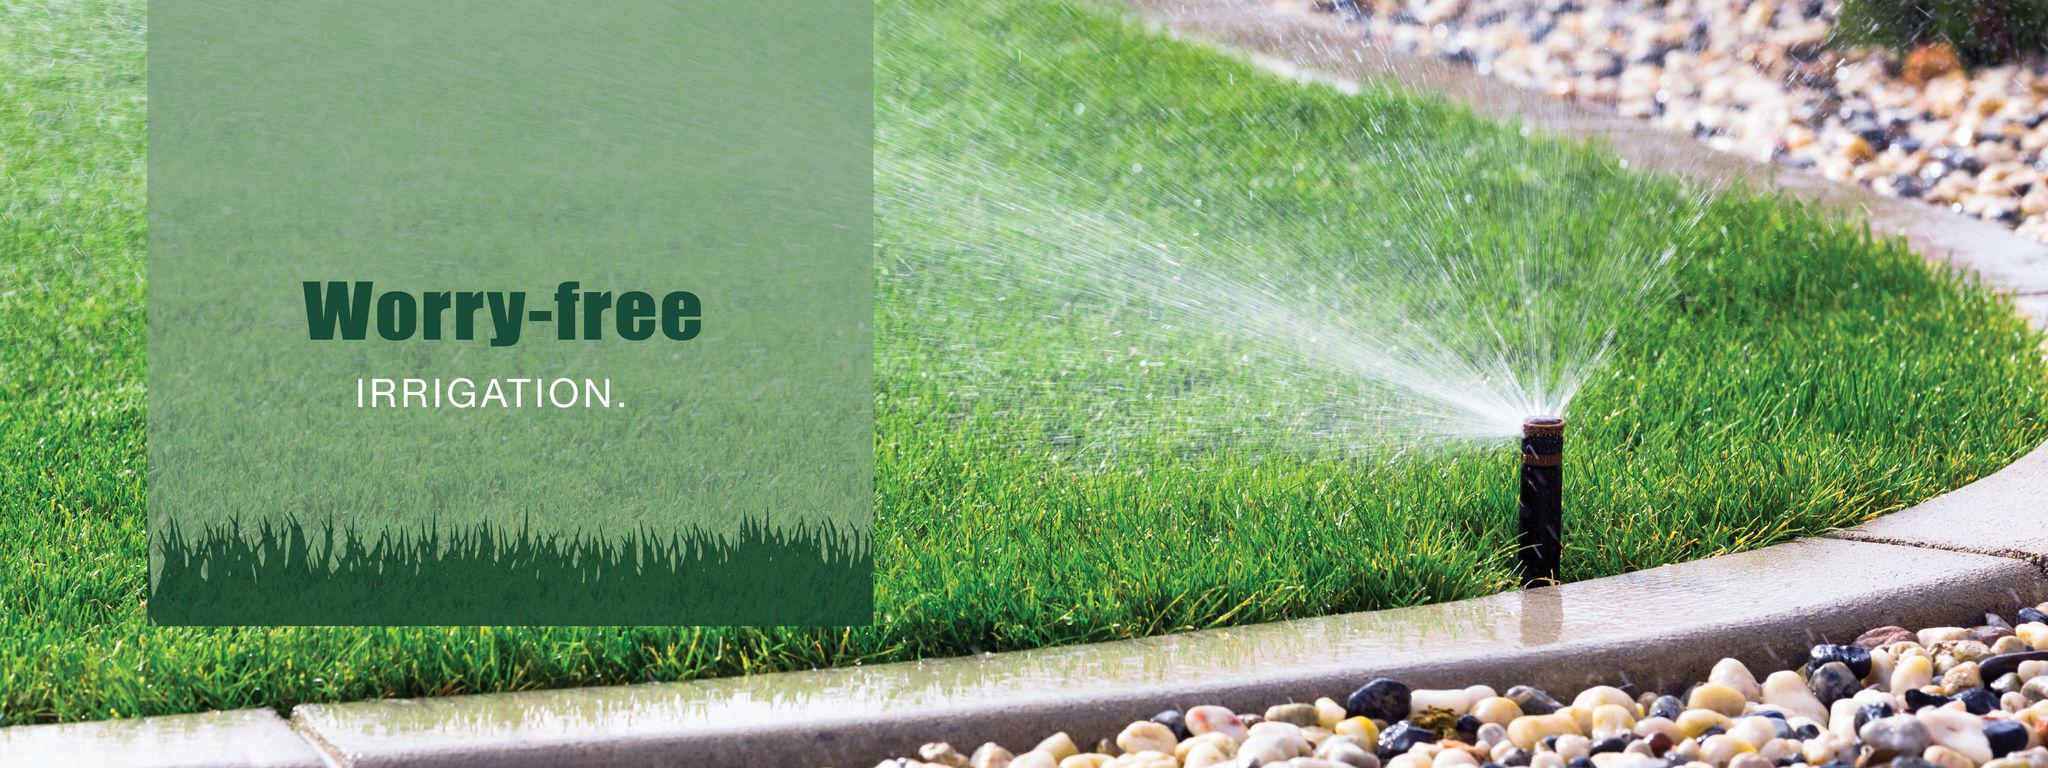 Keep your lawn and landscape looking lush even during low precipitation times. Proper irrigation provides the water your plants and lawn need, when they need it. No more worrying about over watering or under watering.